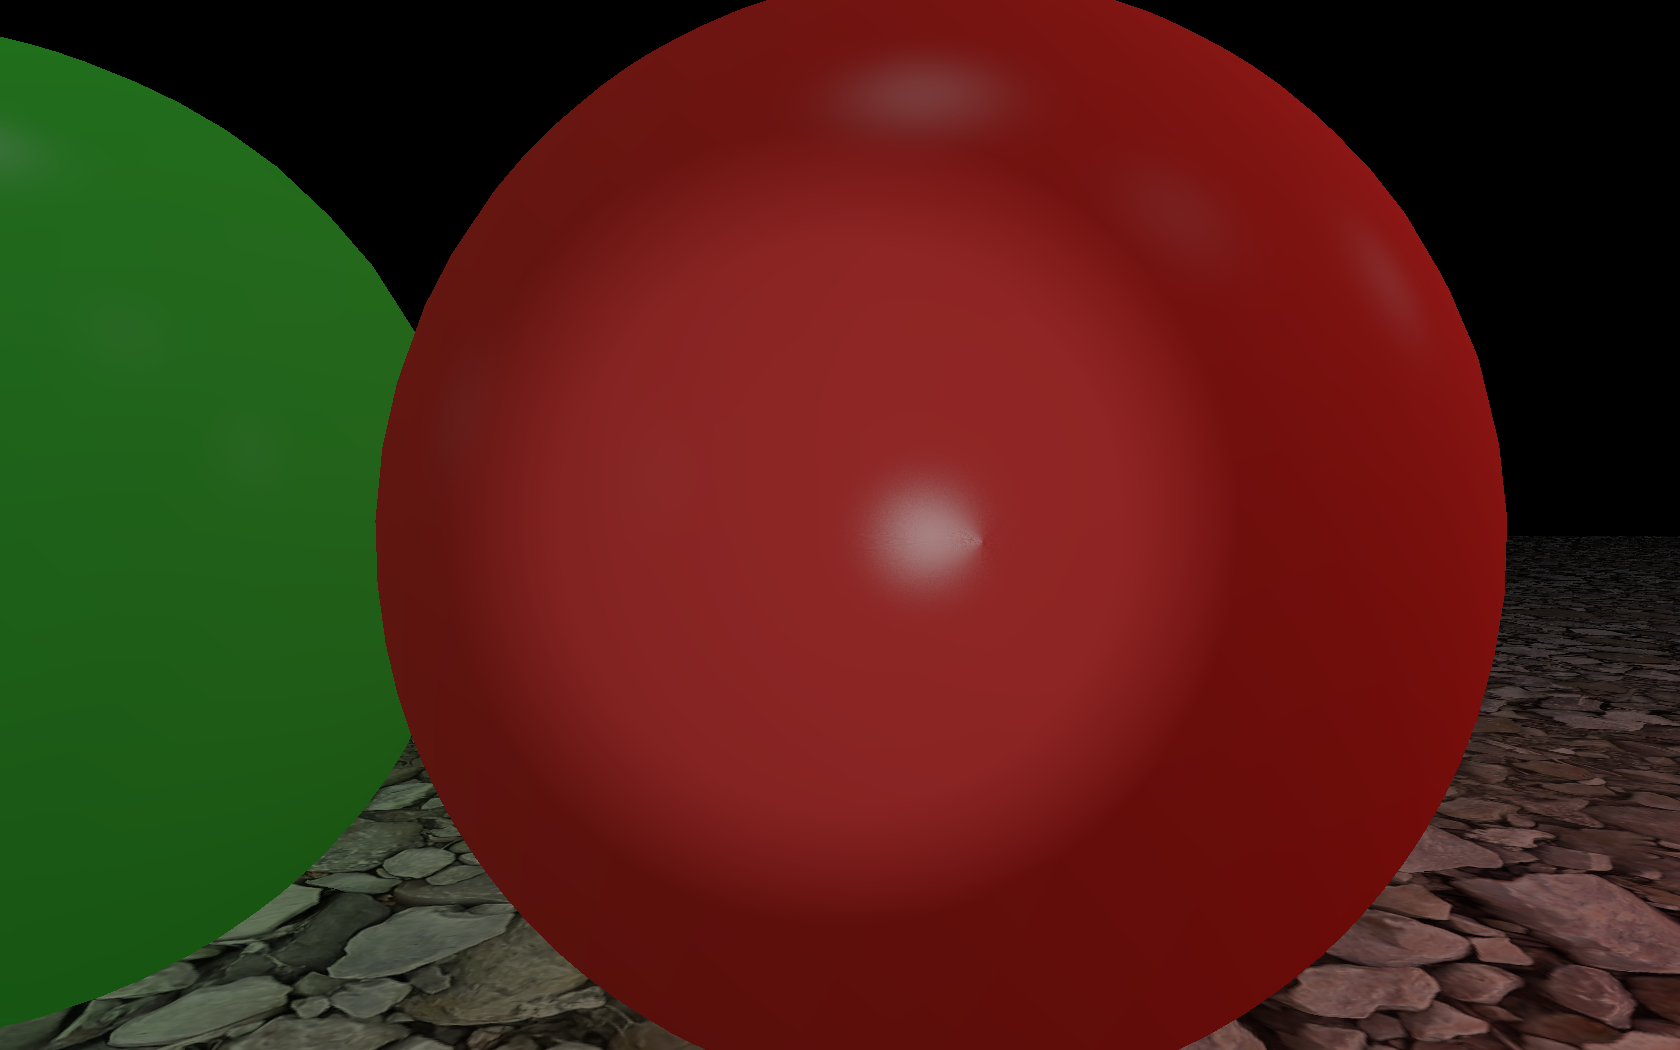 Compact normal for deferred shading